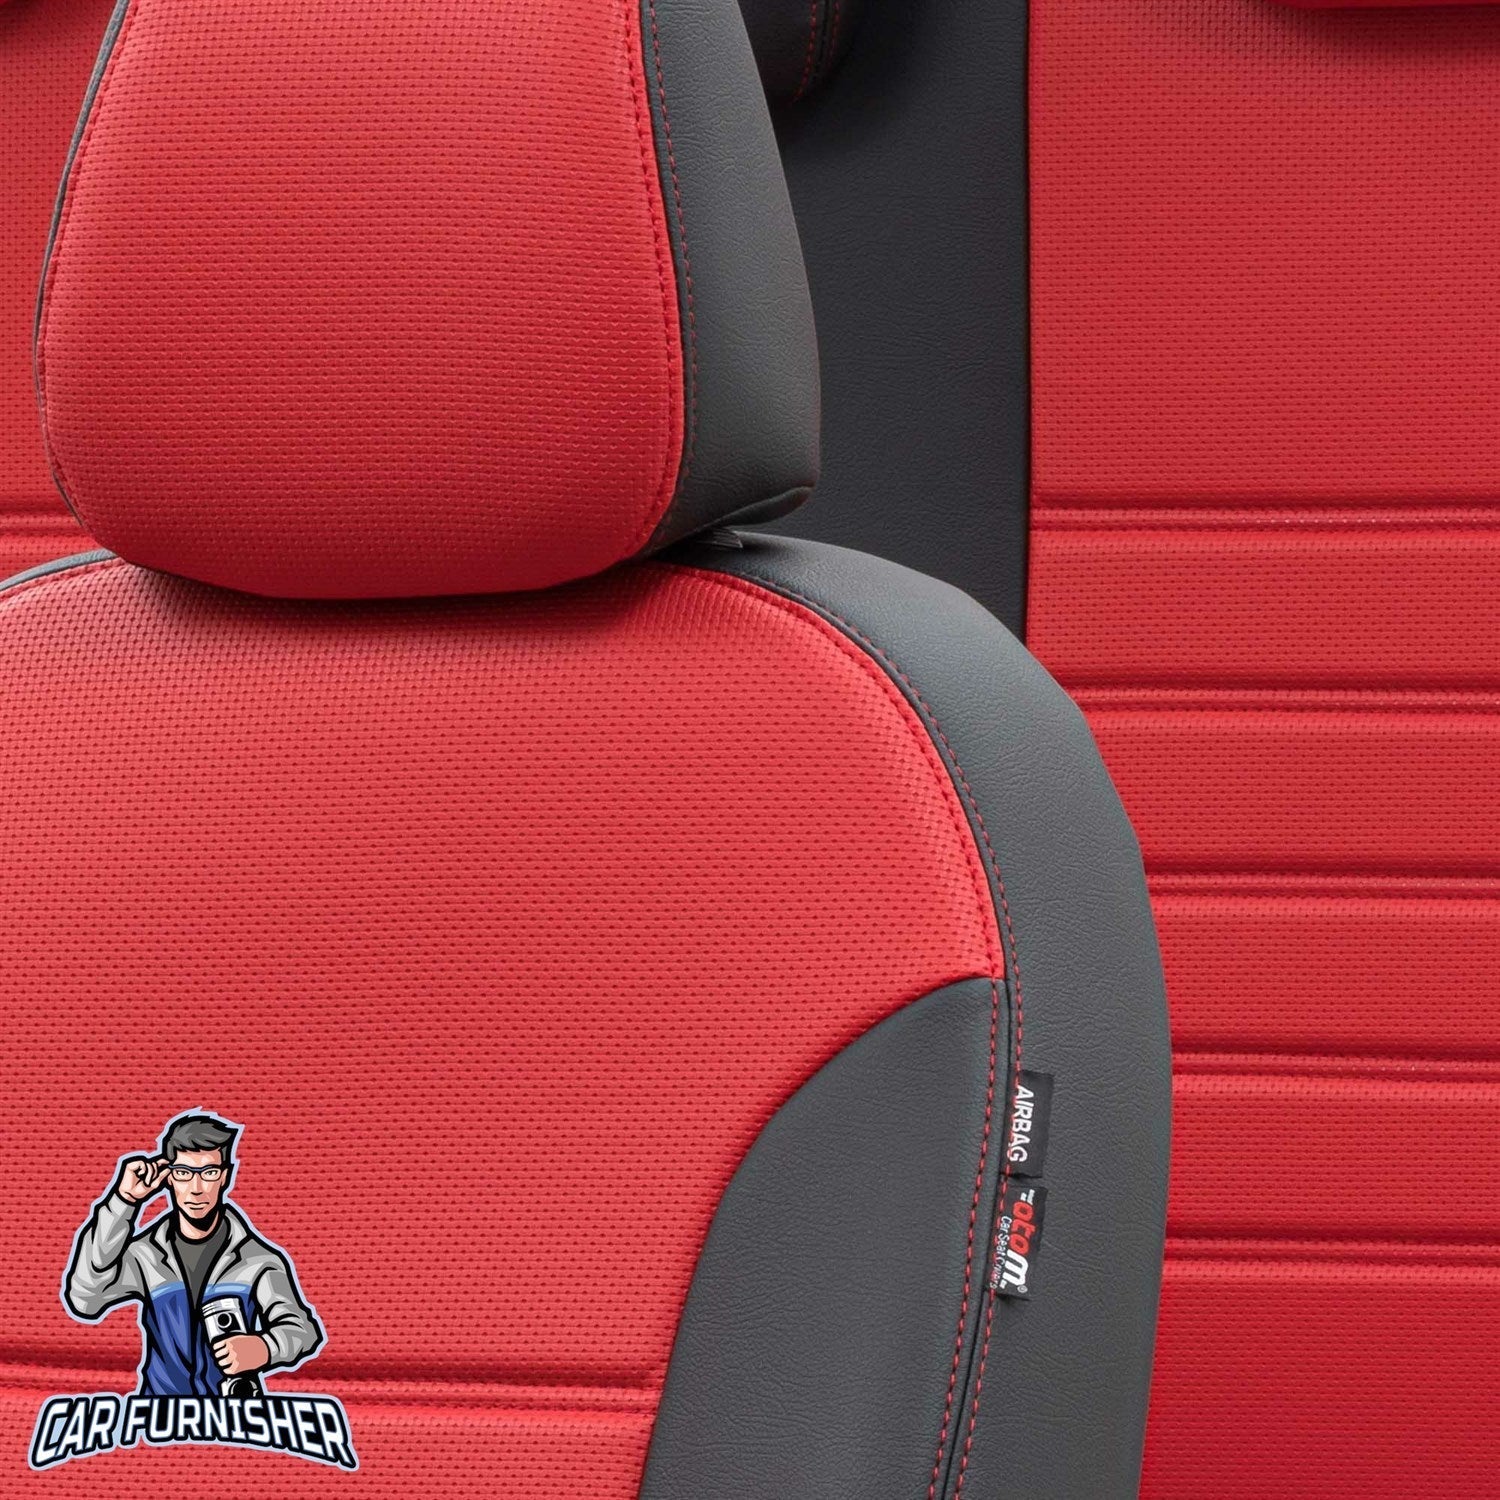 Seat Ateca Seat Covers New York Leather Design Red Leather